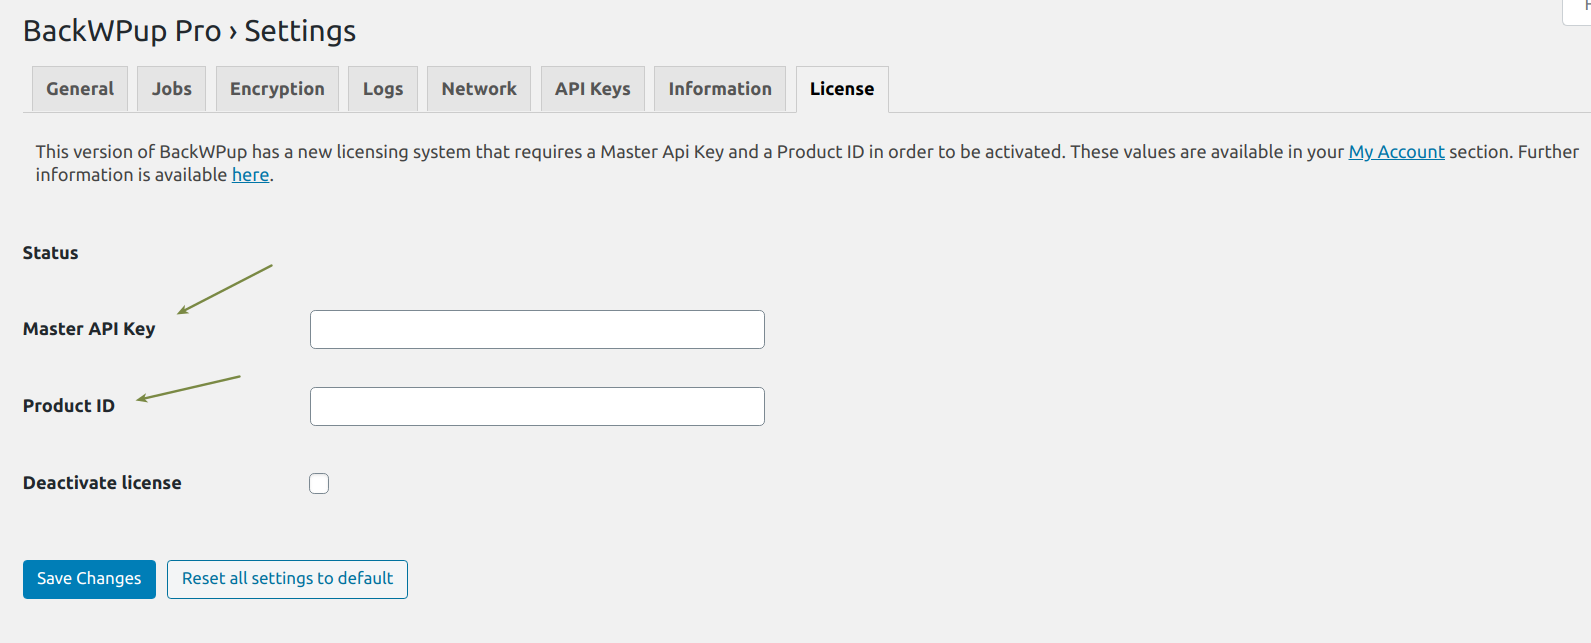 Enter your Master API Key and Product Id to activate your licence